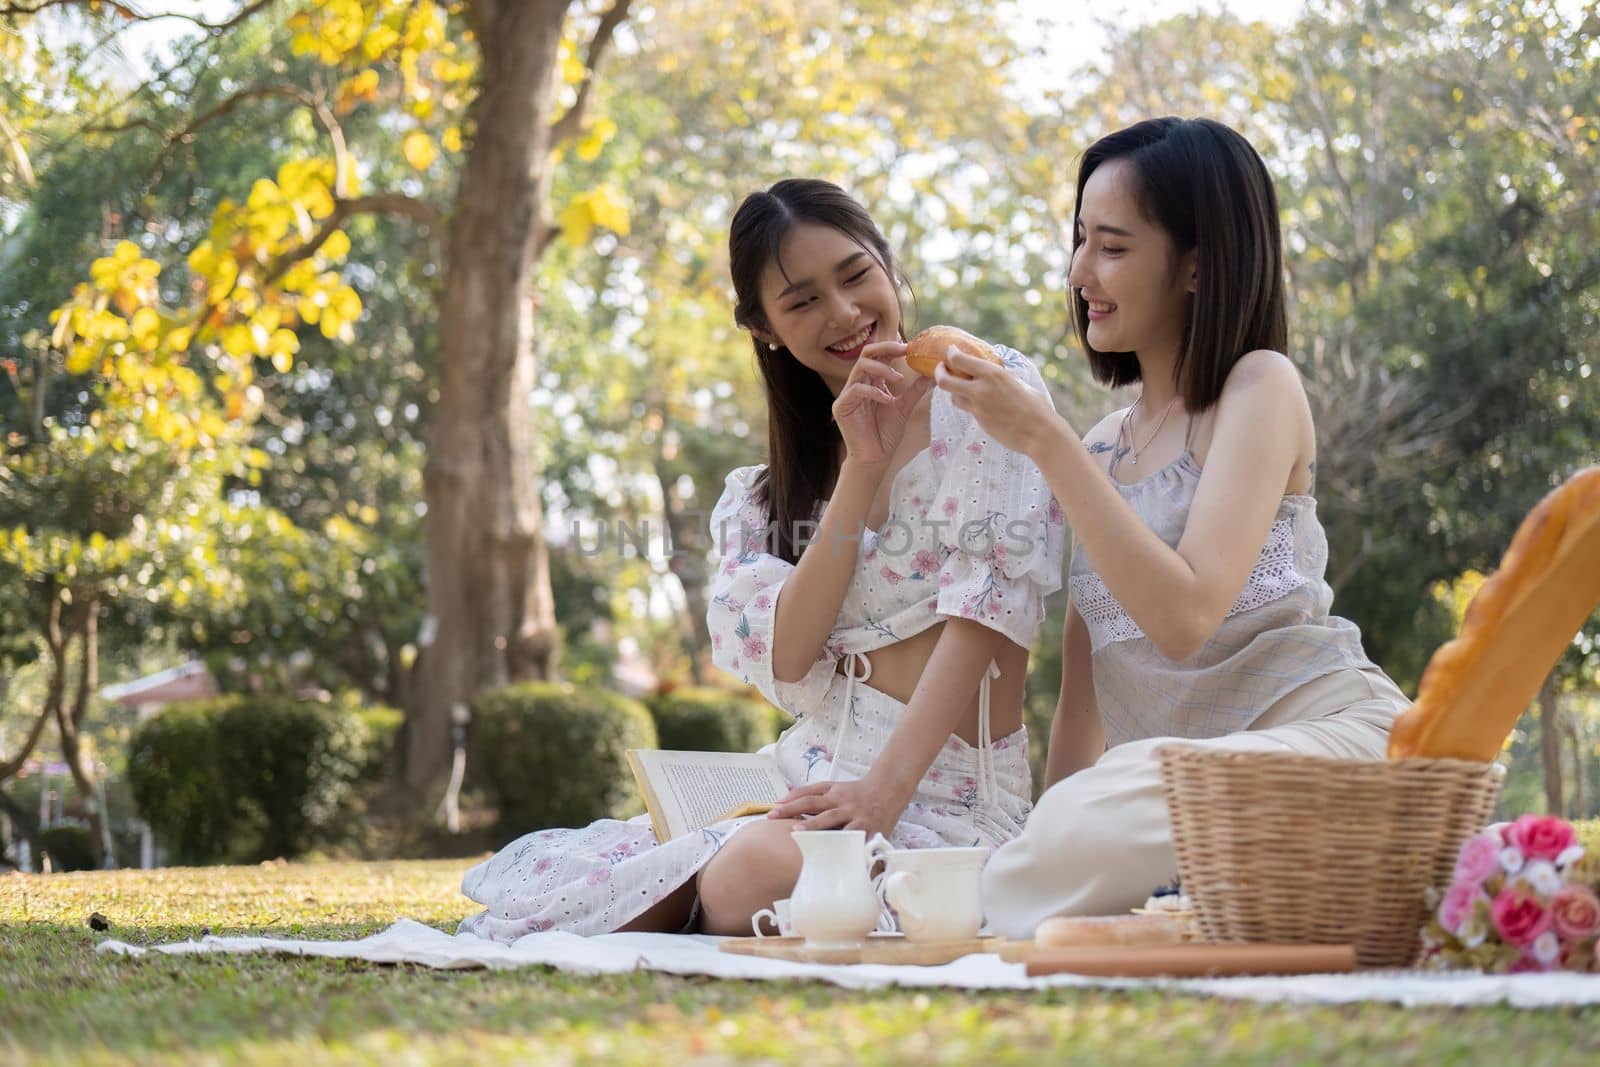 Two charming Asian women in beautiful dresses sitting on picnic cloth, having an tea picnic party together in the garden by nateemee